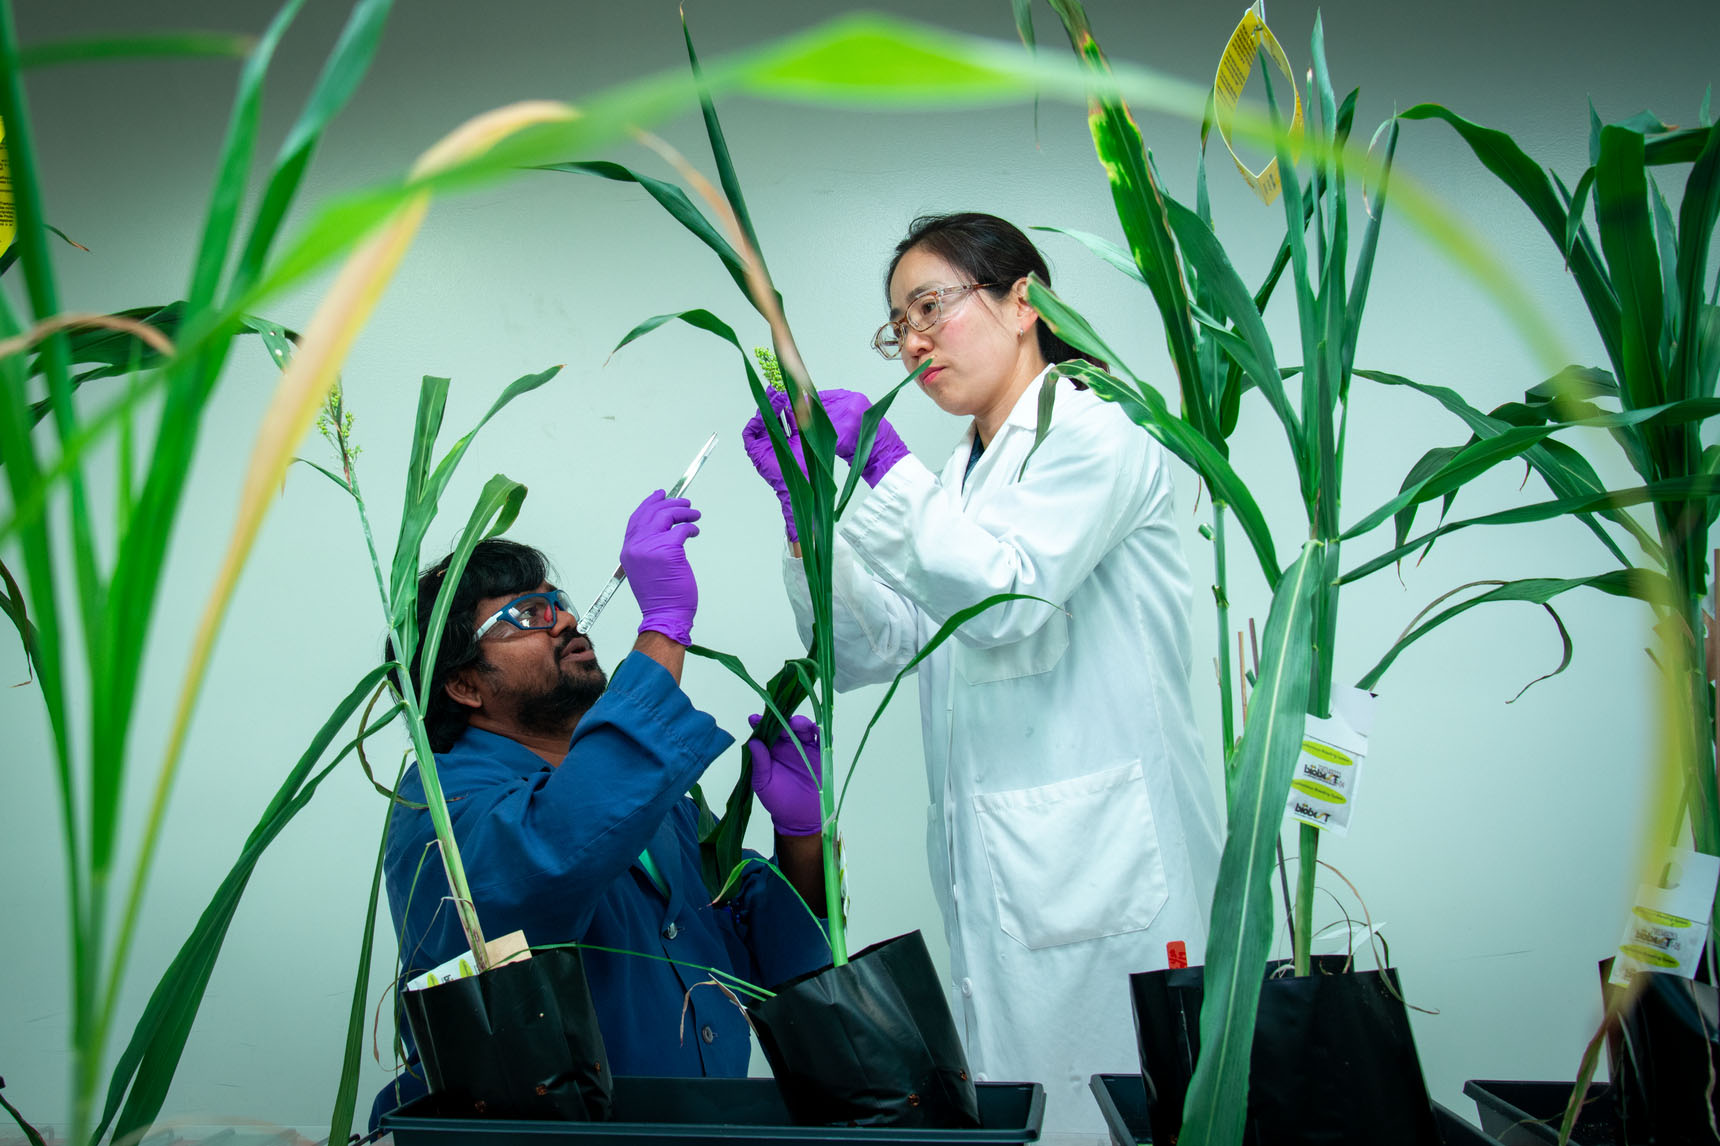 Two scientists wearing lab coats, gloves, and protective glasses, examine sorghum plants in a plant growth chamber .